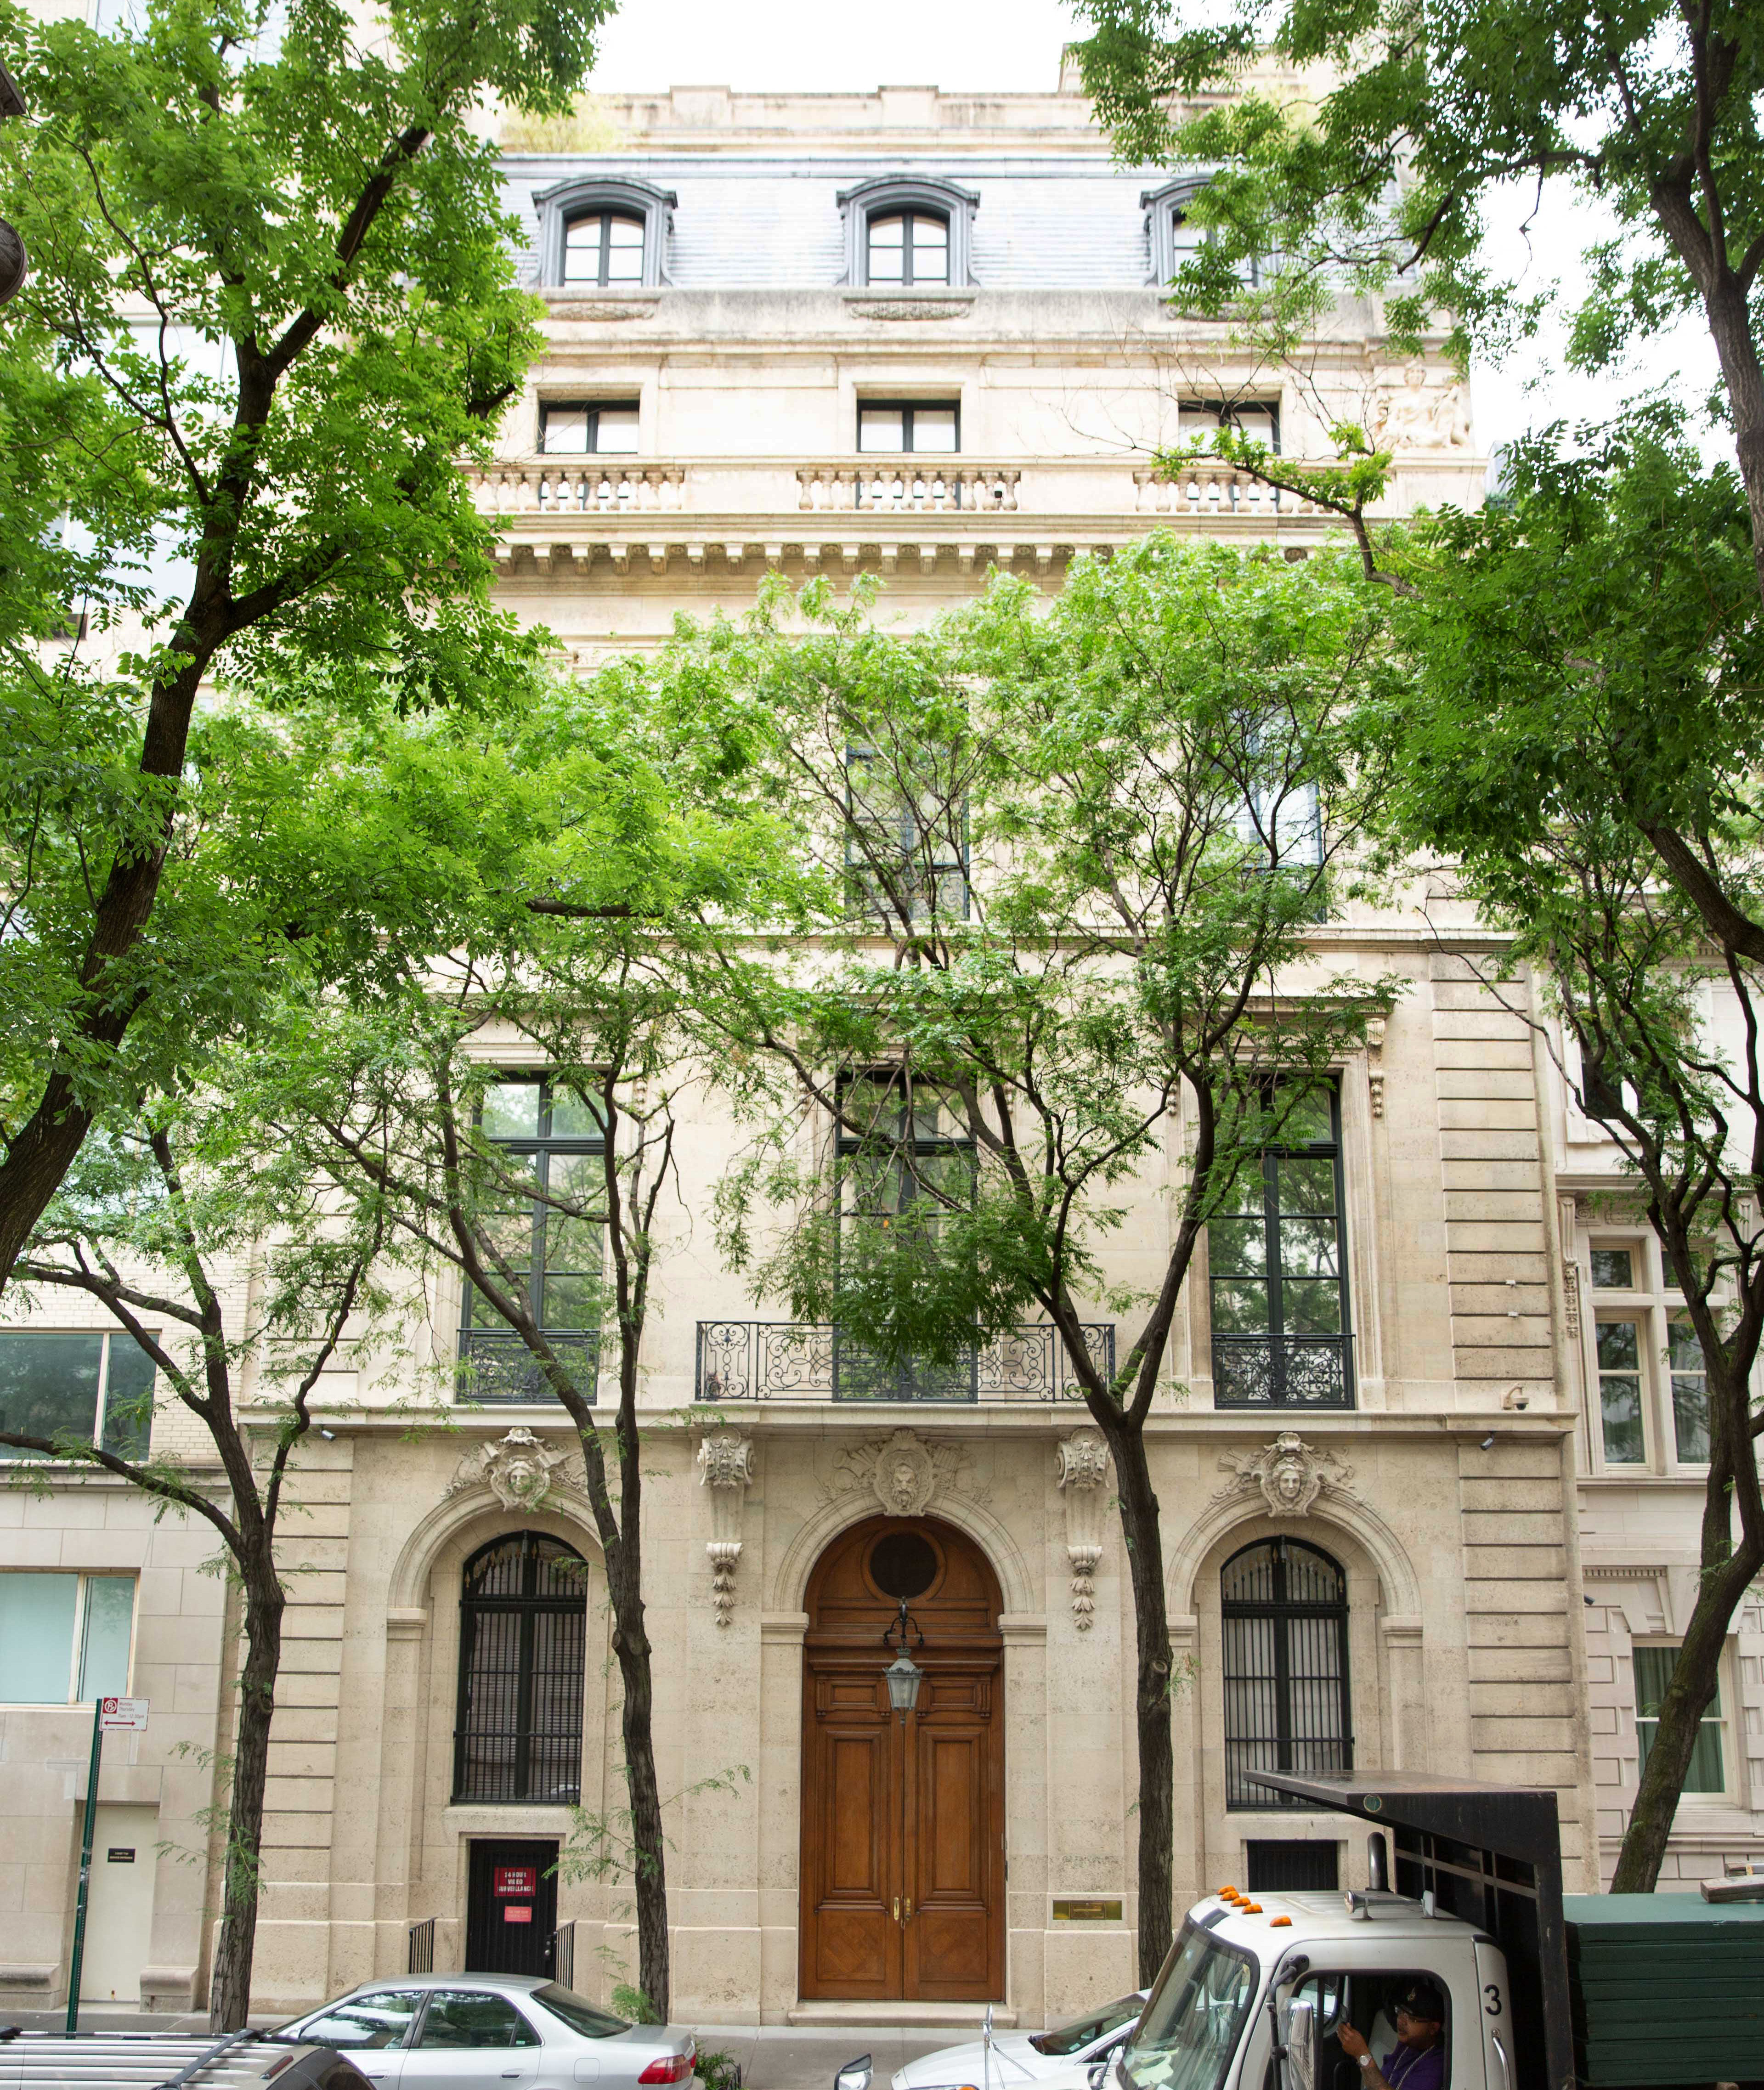 A residence belonging to Jeffrey Epstein at East 71st street is seen on the Upper East Side of Manhattan on July 8, 2019 in New York City. According to reports, Epstein is charged with running a sex-trafficking operation out of his opulent mansion. (Photo by Kevin Hagen/Getty Images)